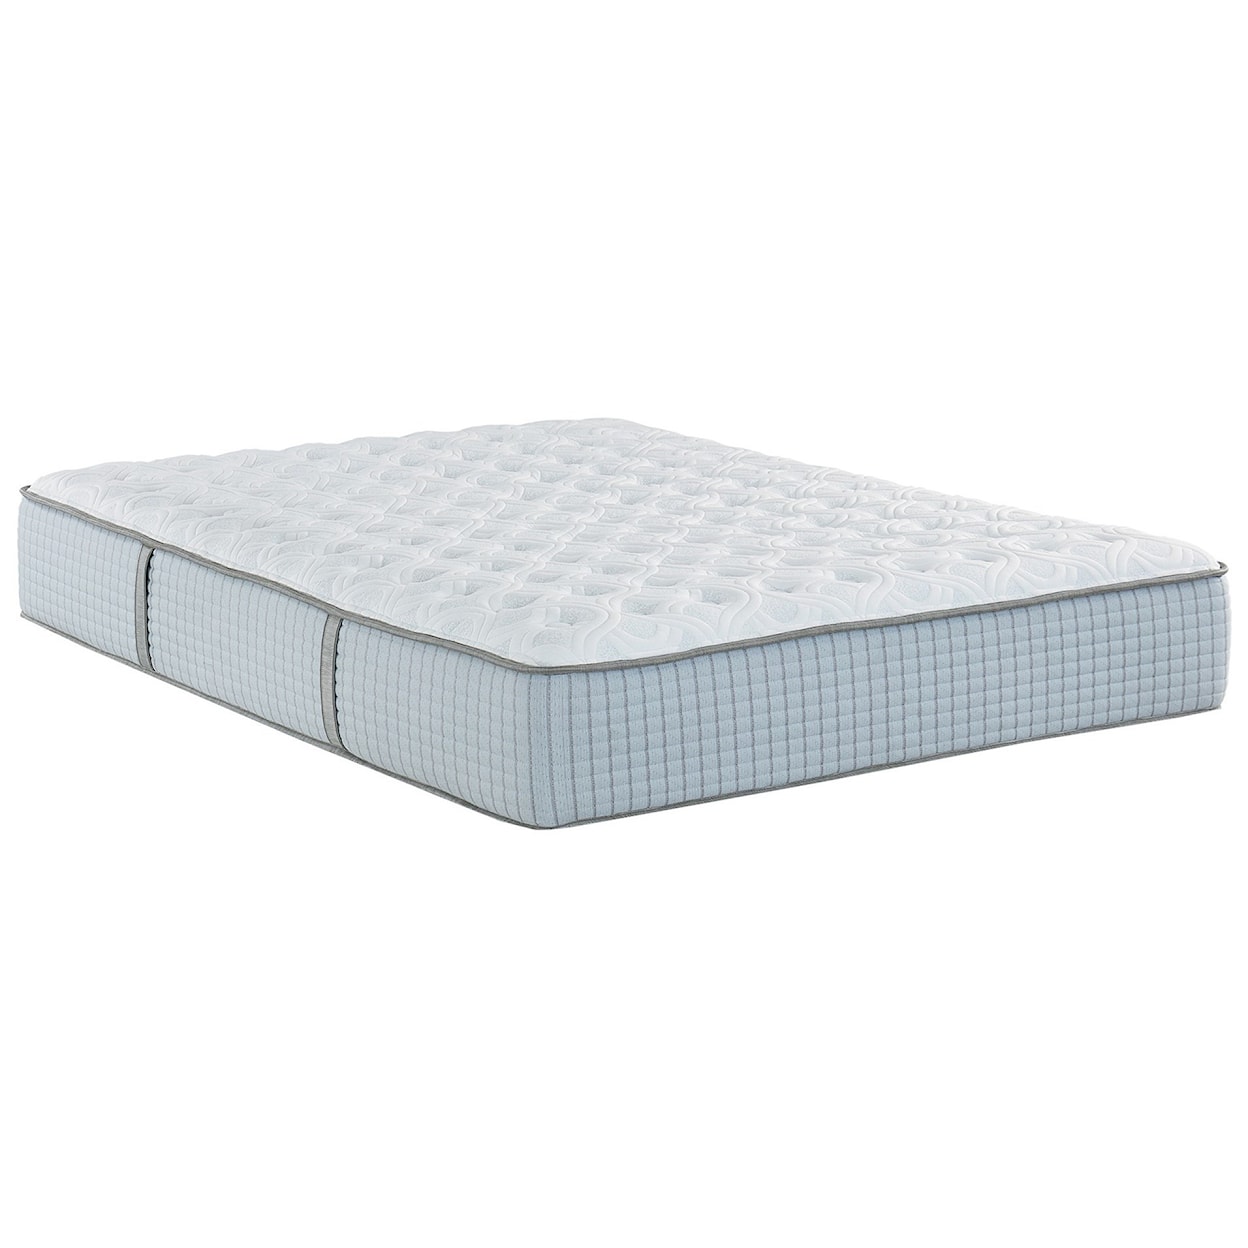 Restonic Clarion IV Luxury Plush and Luxury Firm Cal King 2-Sided Firm / Plush Mattress